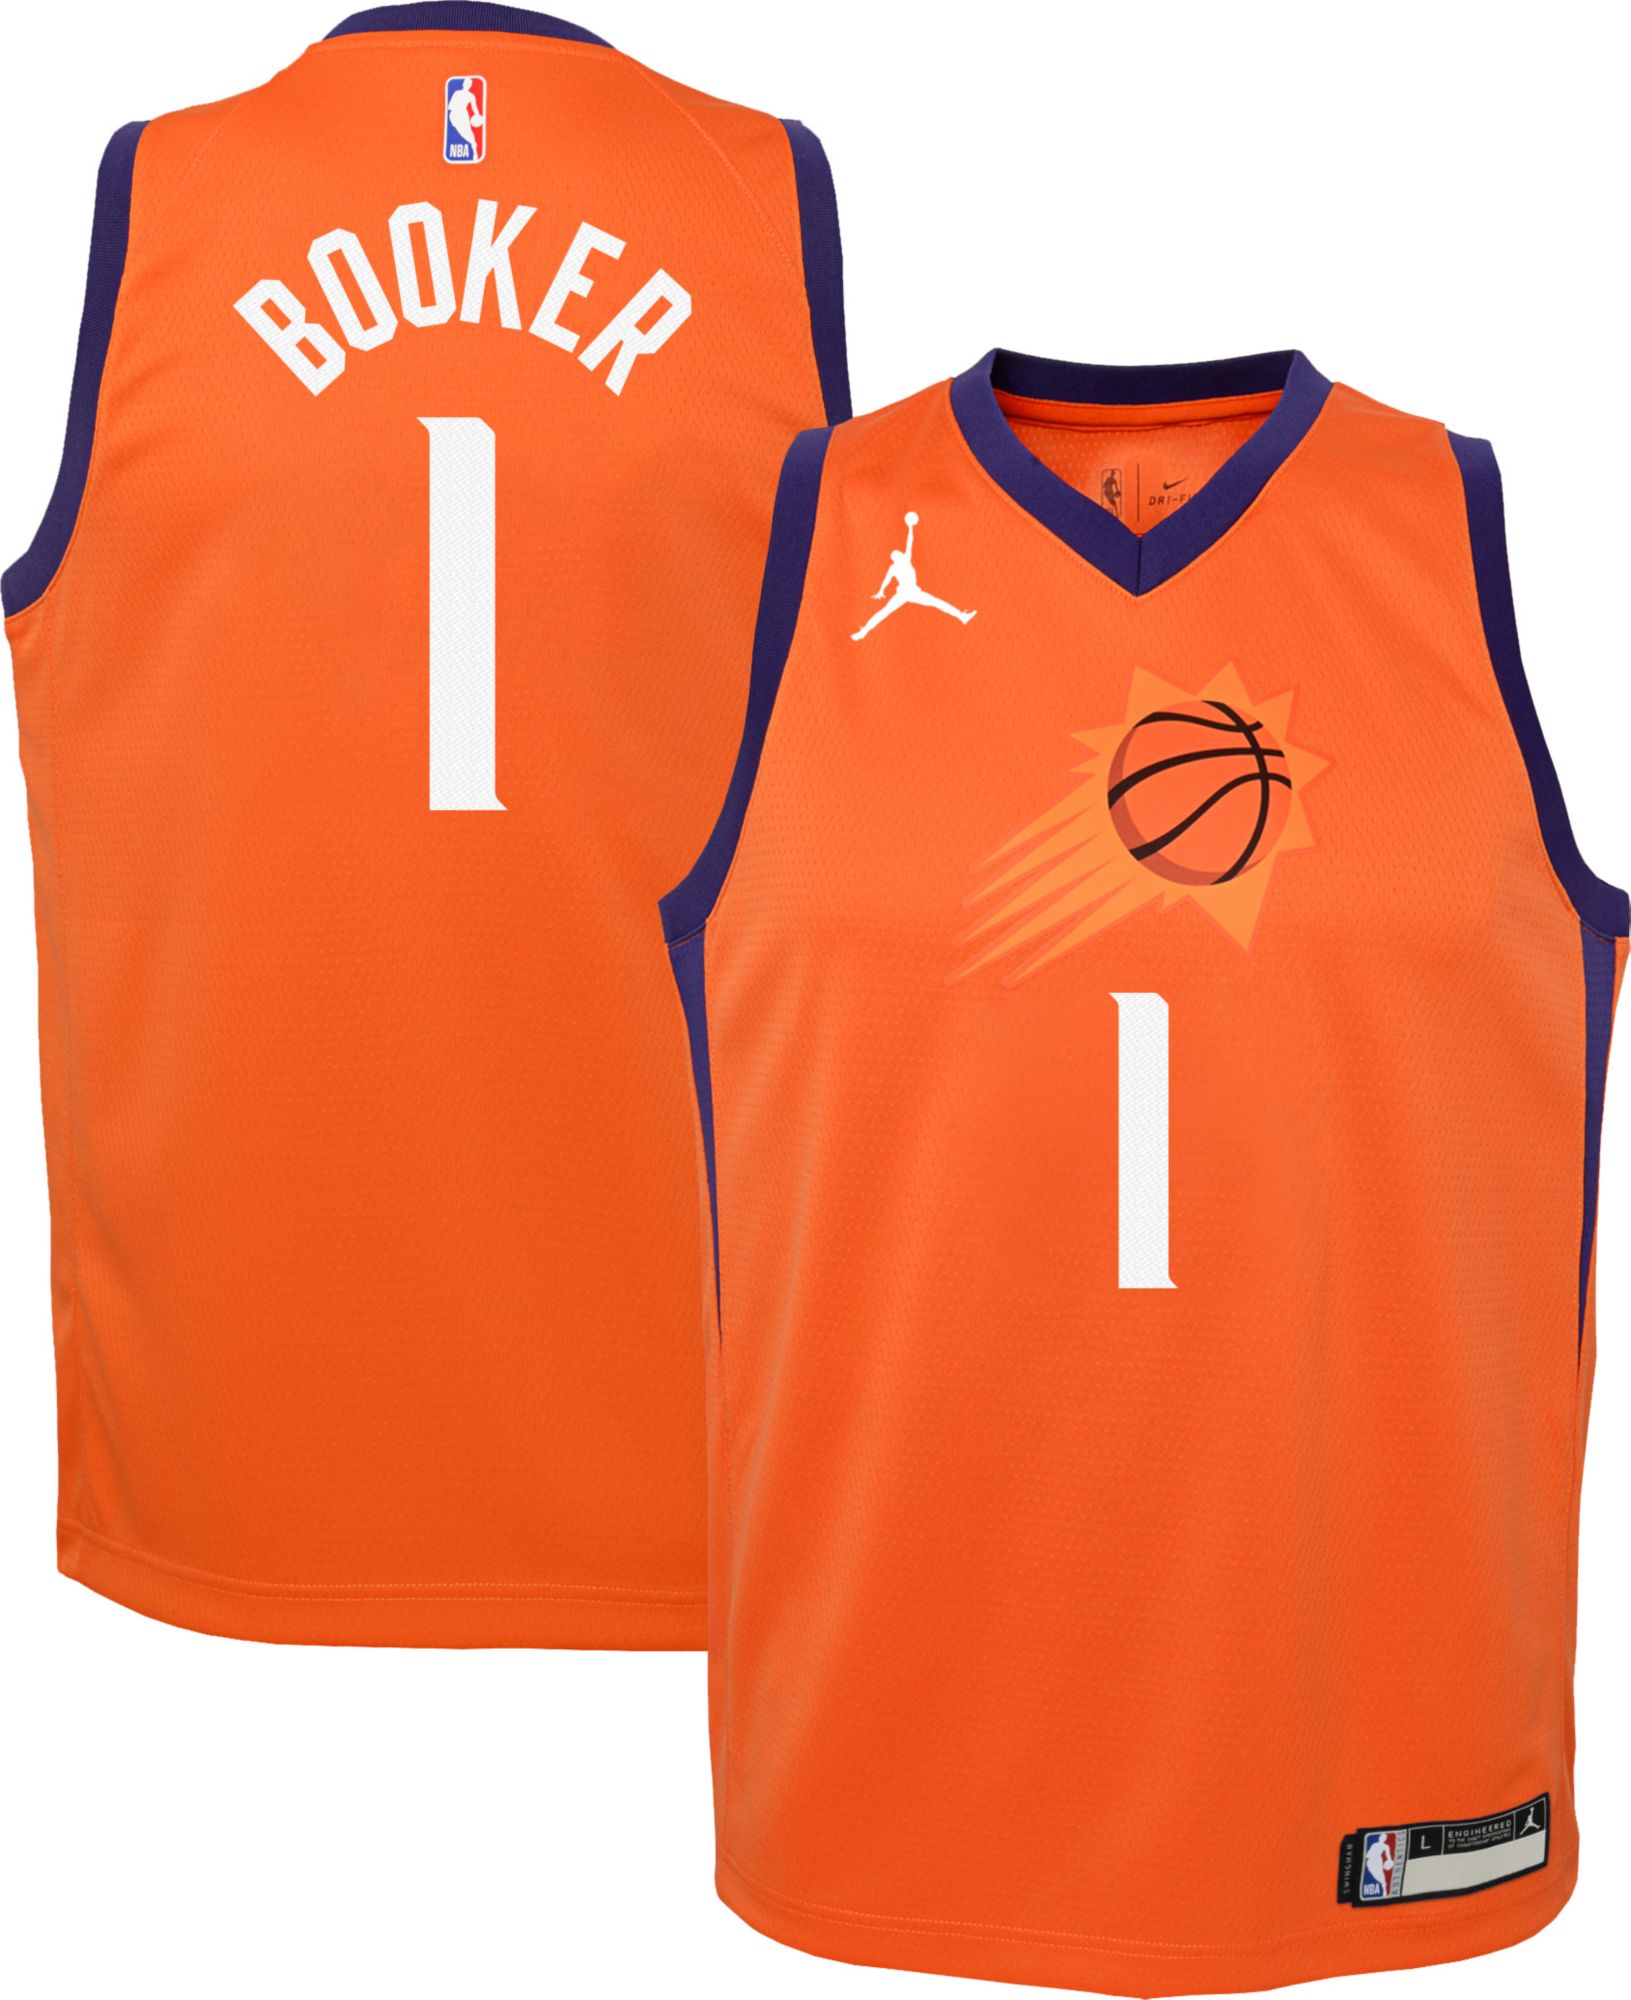 devin booker youth jersey